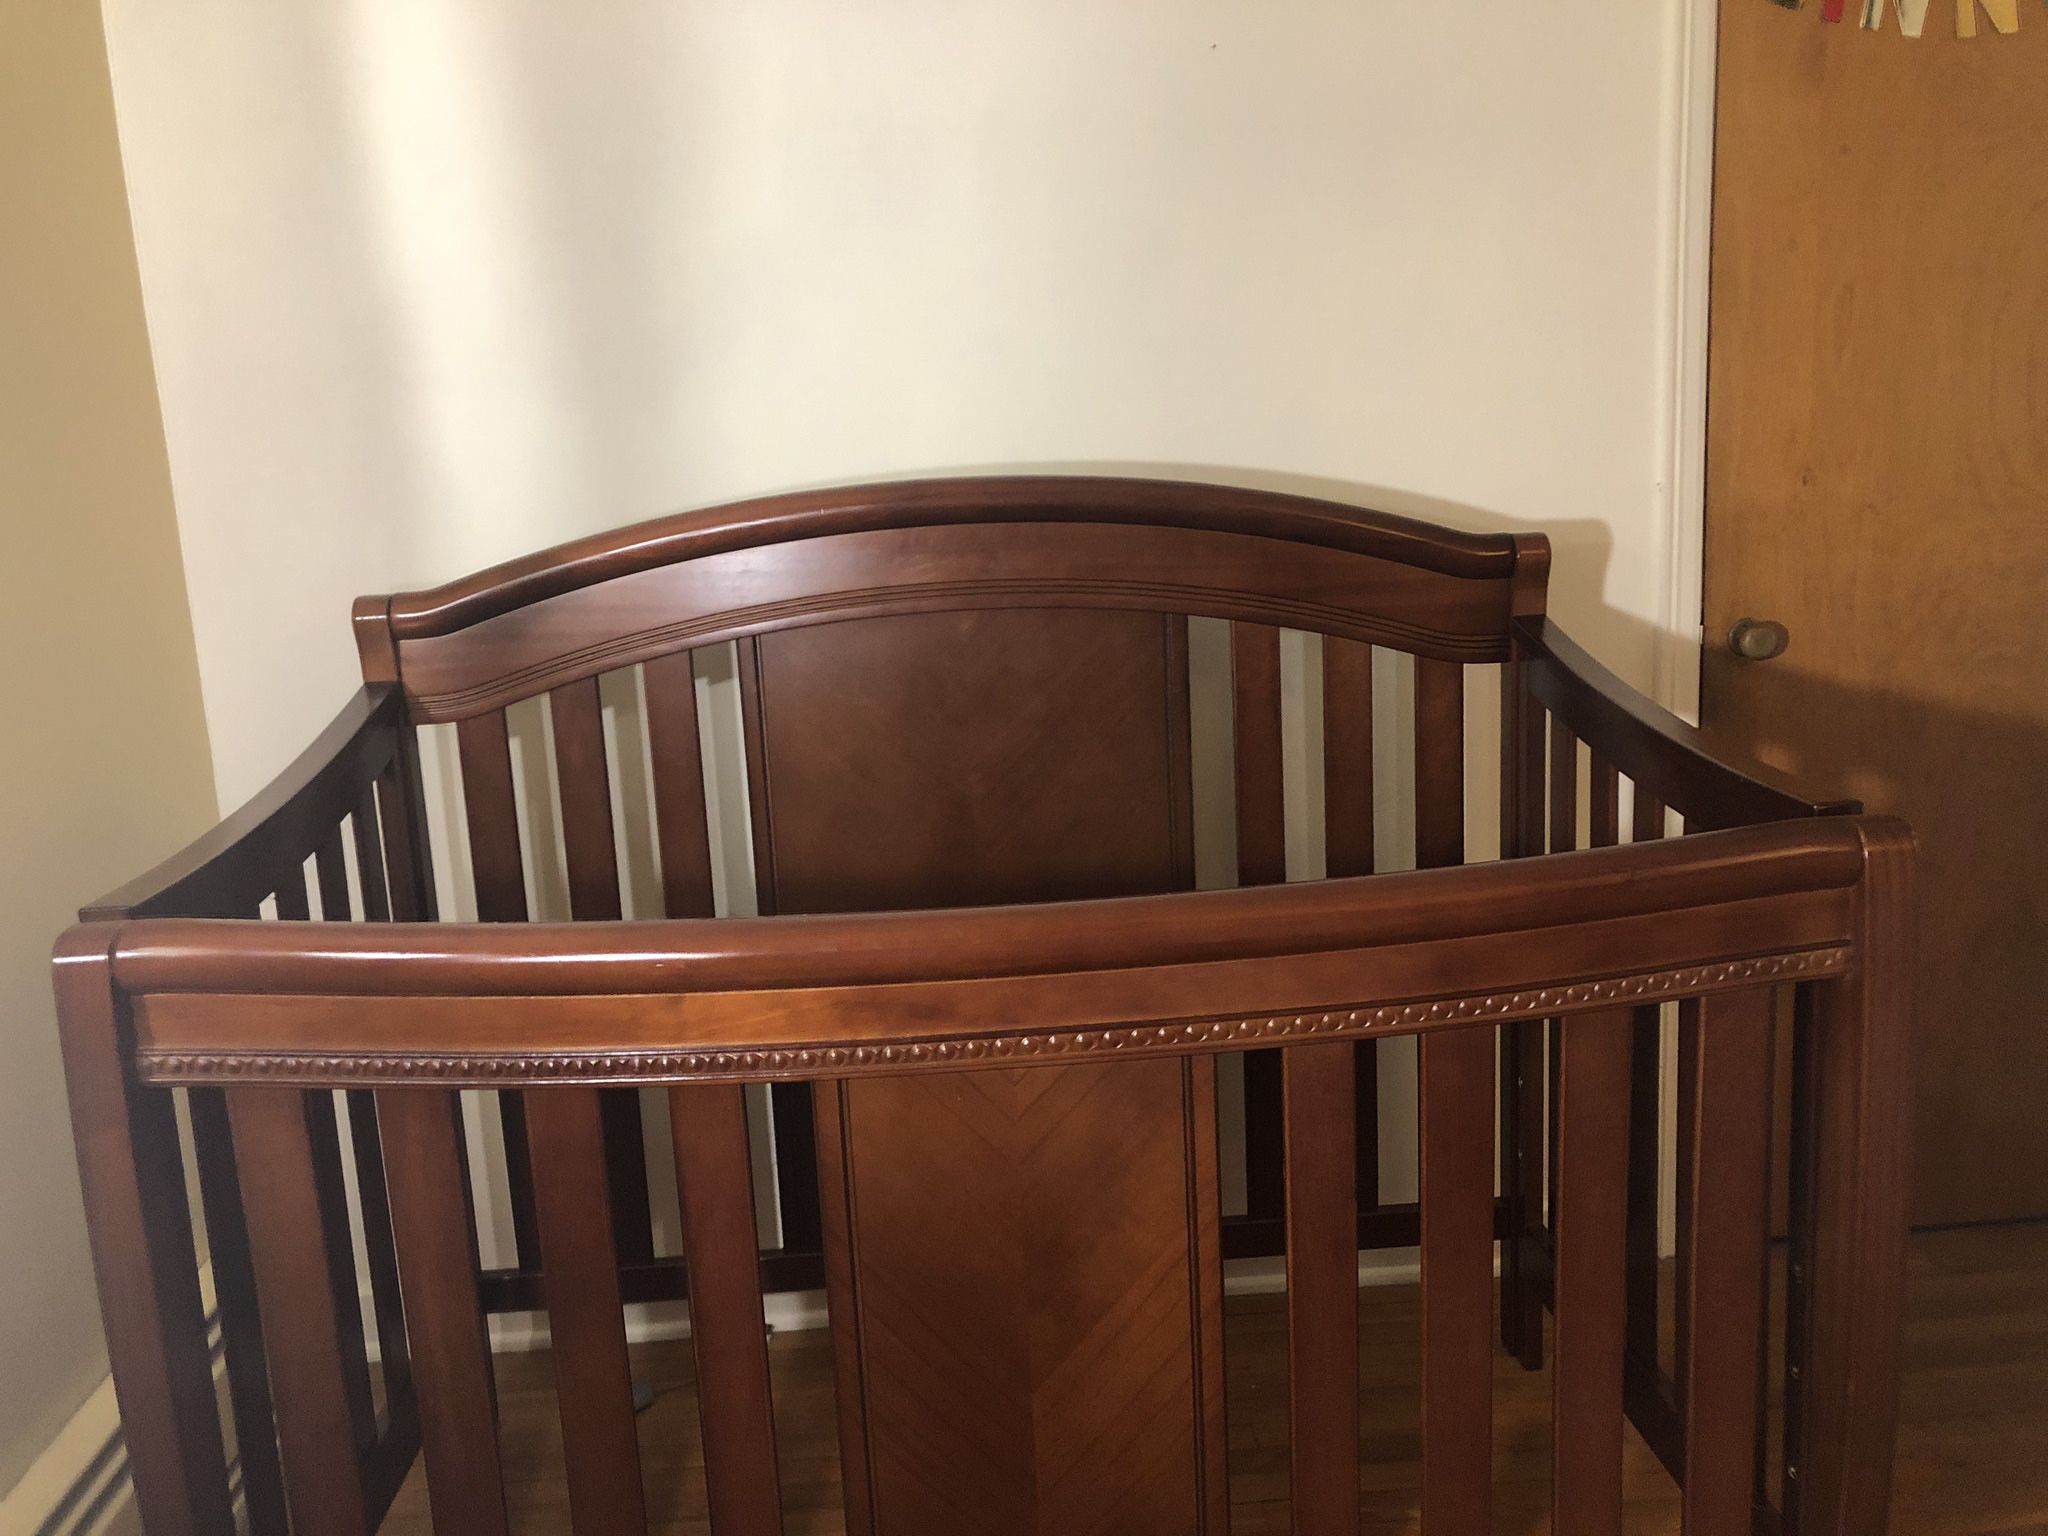 Baby Crib In Very Good Condition With Minor Scratches 